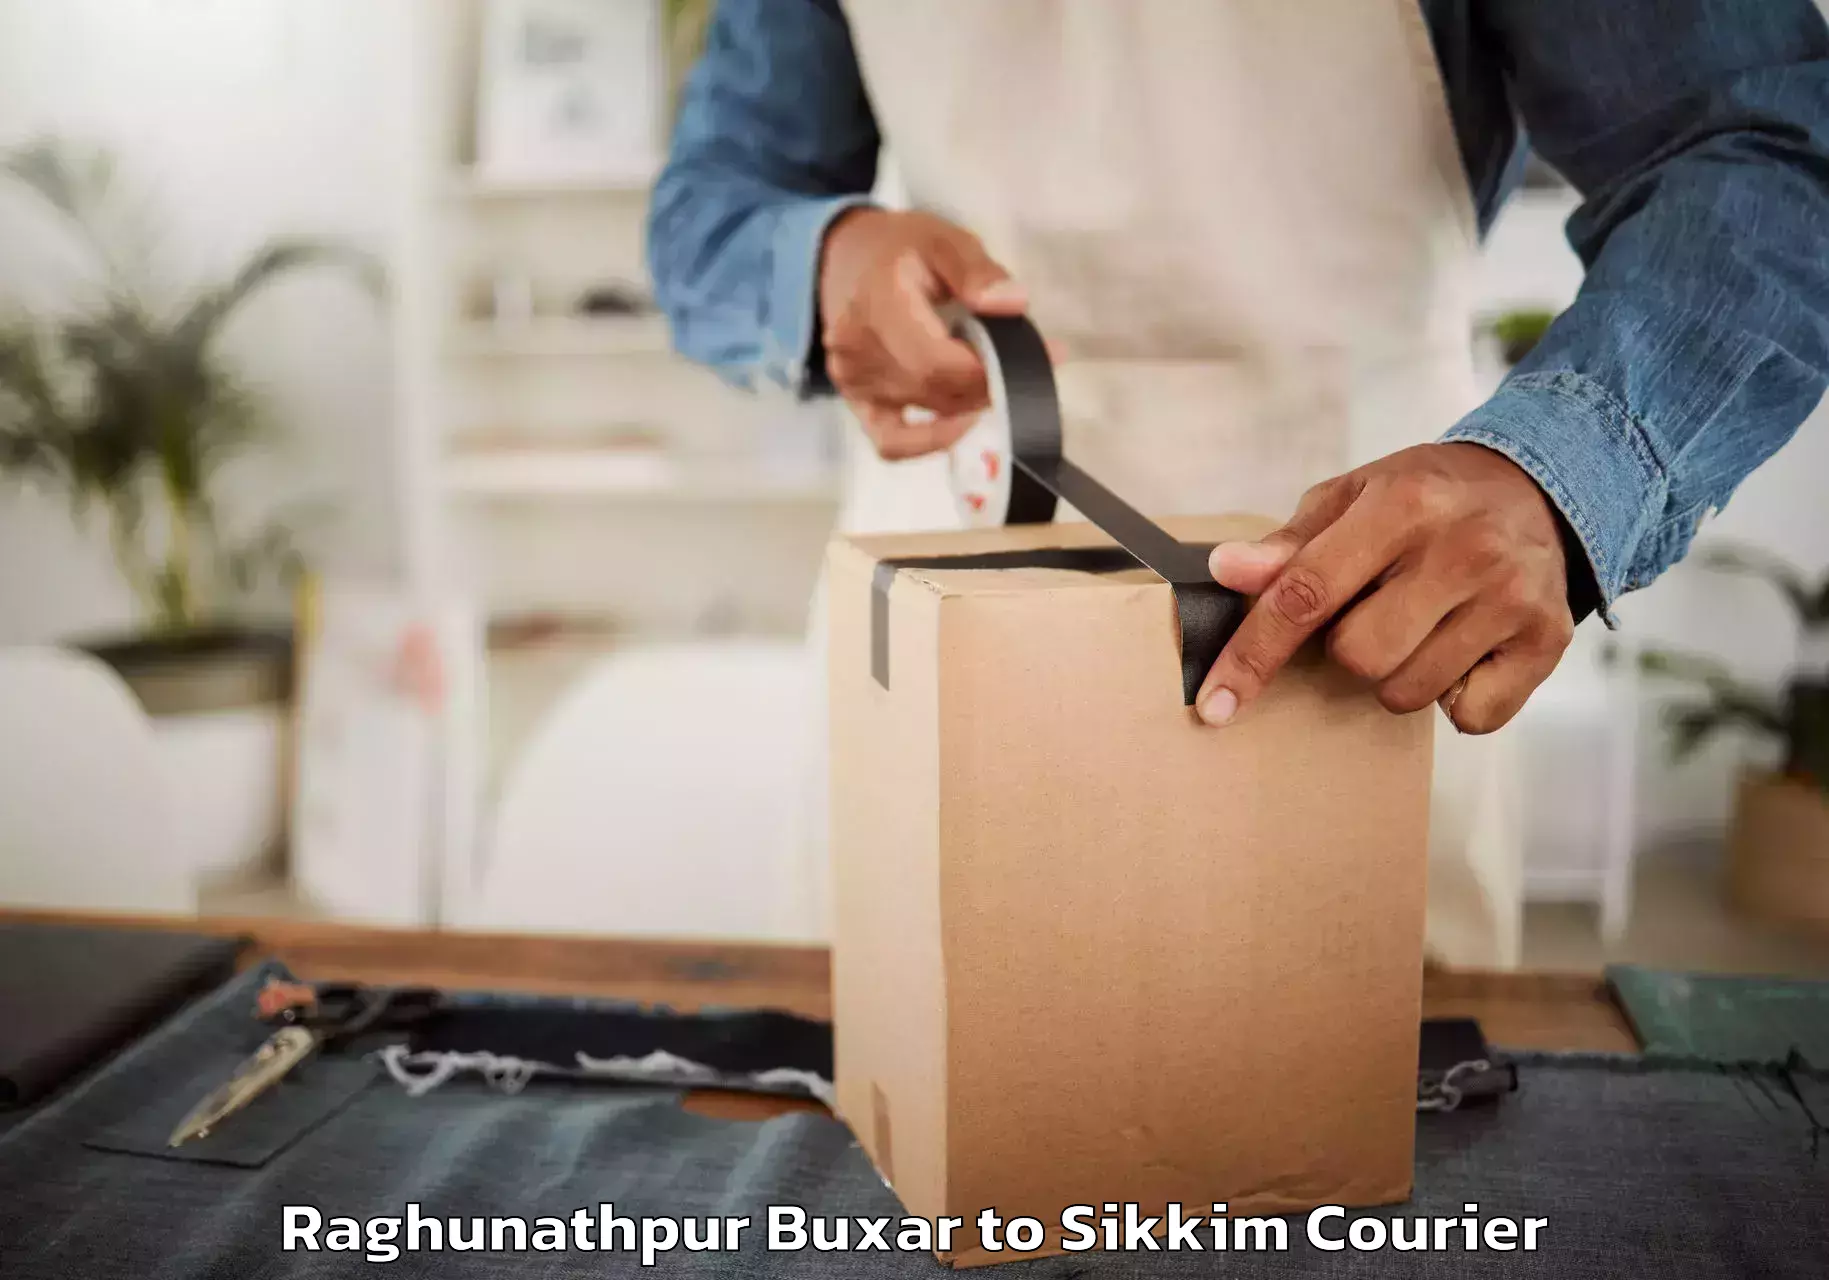 Professional movers and packers Raghunathpur Buxar to Mangan